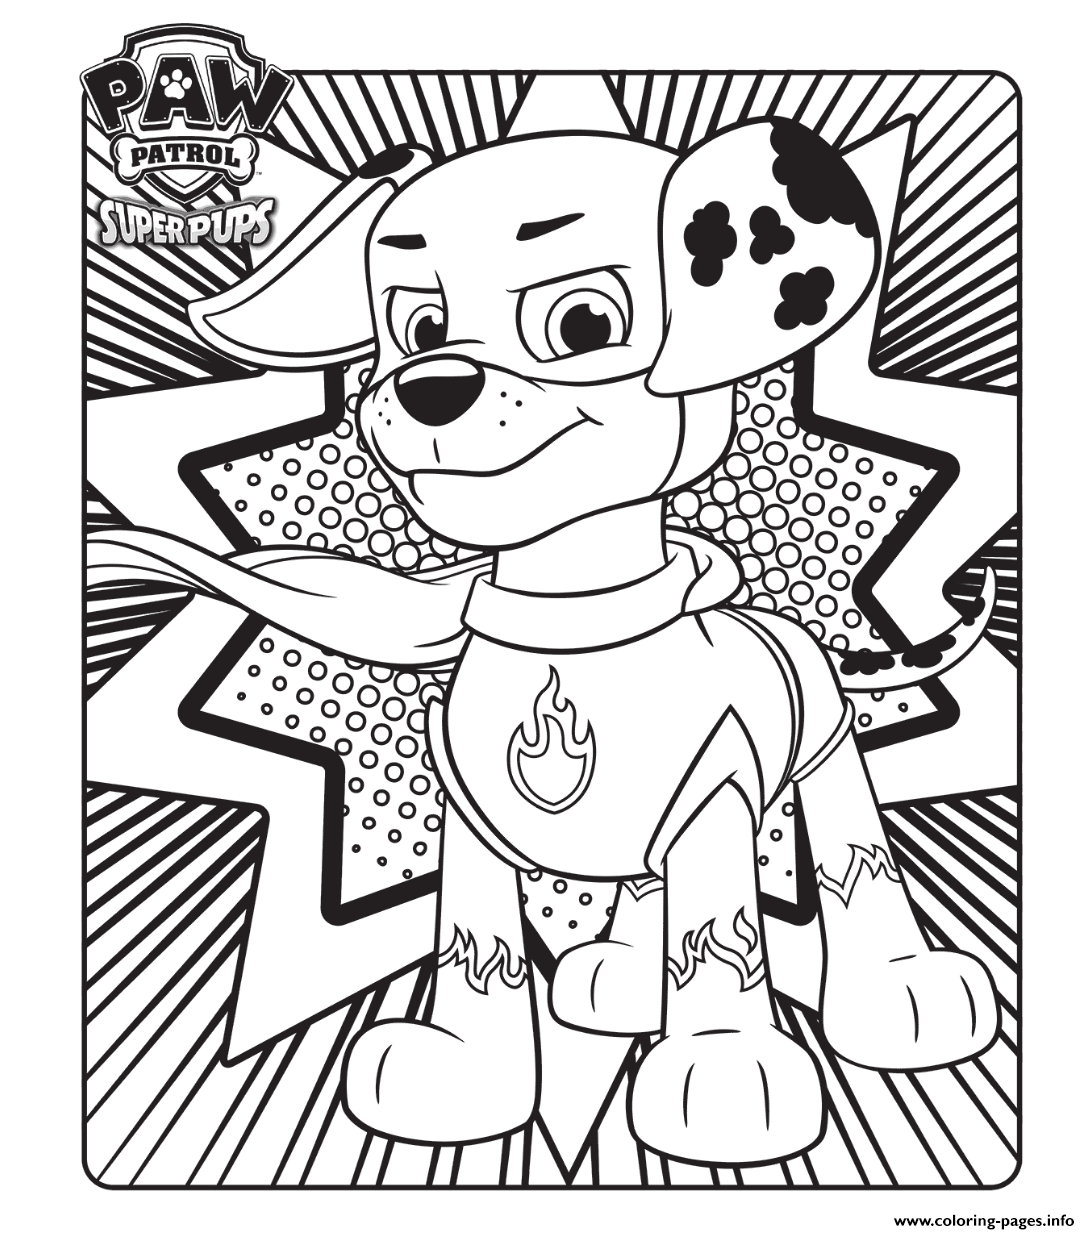 Paw Patrol Super Pups Download Coloring Pages Printable Puppies